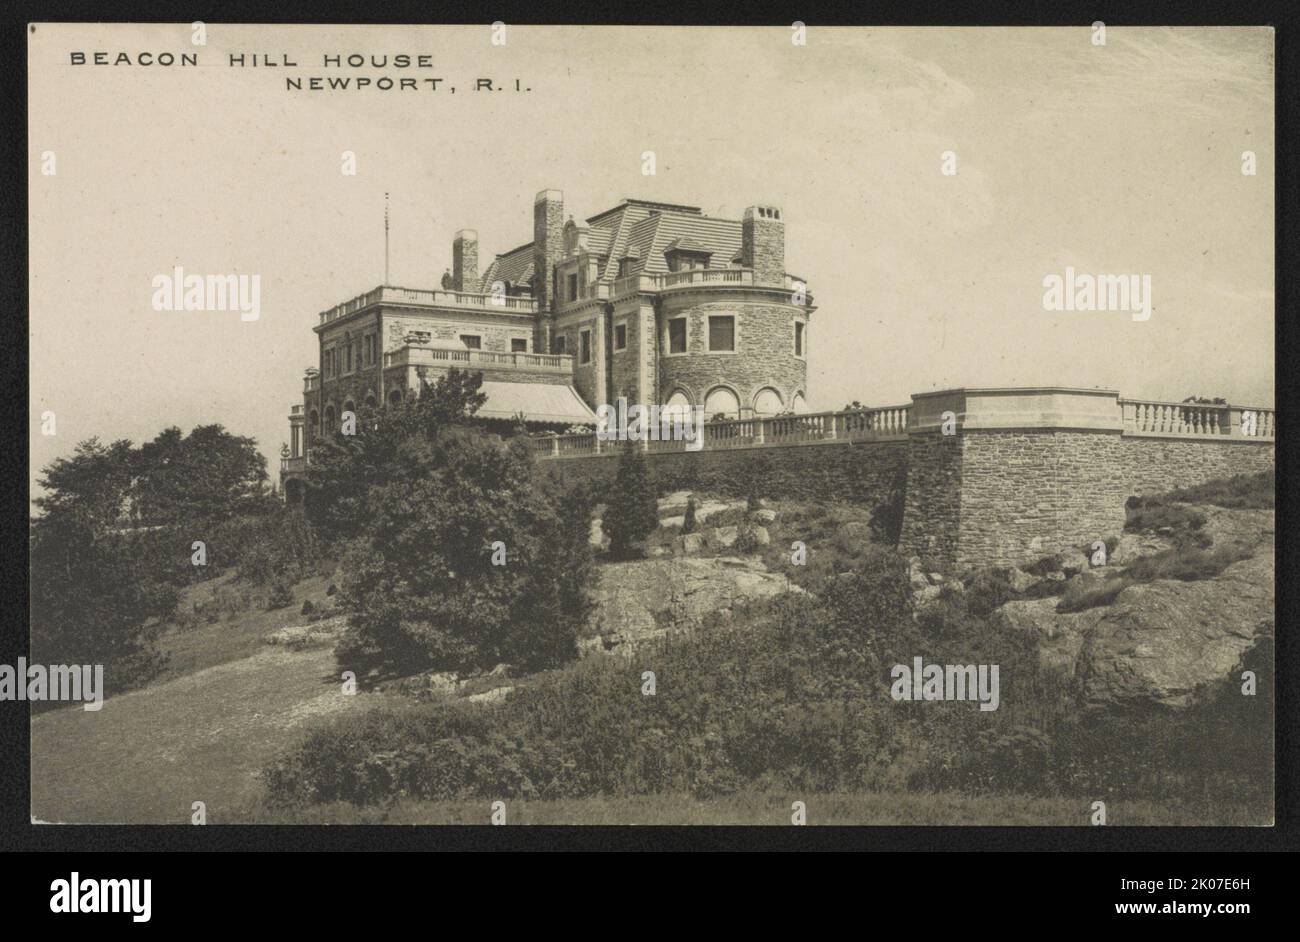 Beacon Hill House, Newport, R.I., between 1913 and 1920. Postcard shows the mansion built by Arthur Curtiss and Harriet Eddy Parsons James, Newport, Rhode Island. Stock Photo